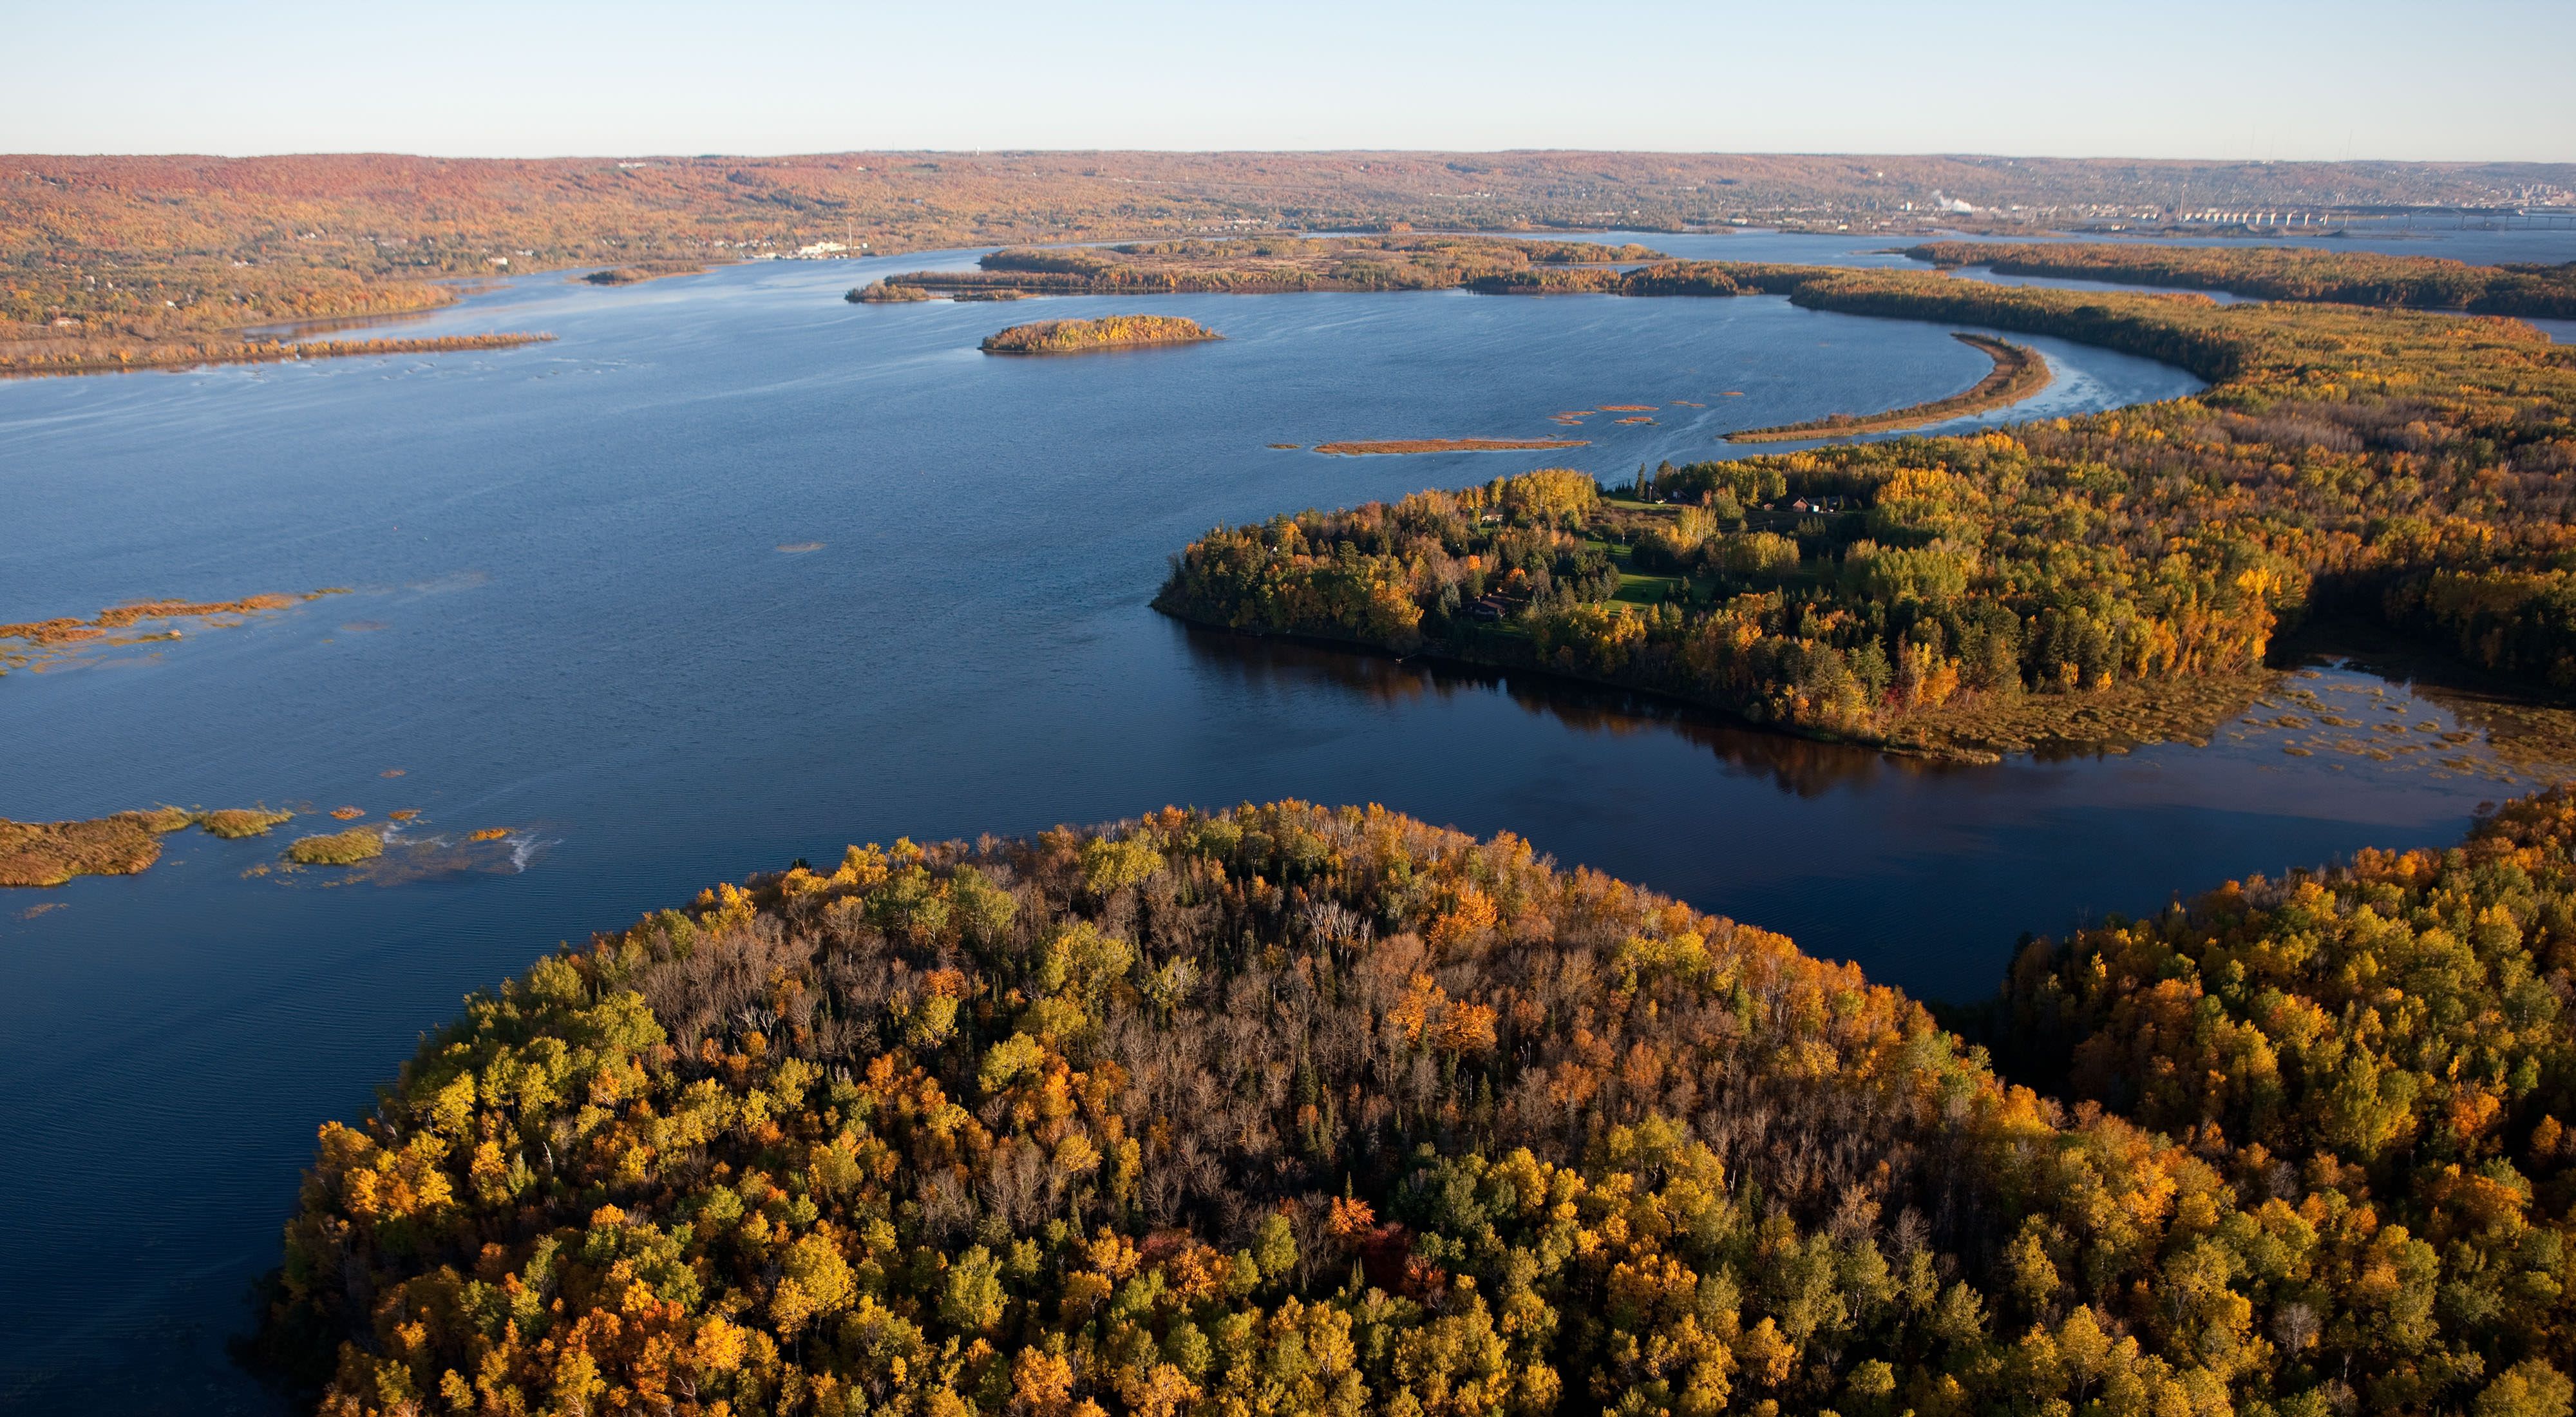 Aerial view of a broad river with islands in it covered in trees showing some fall colors.